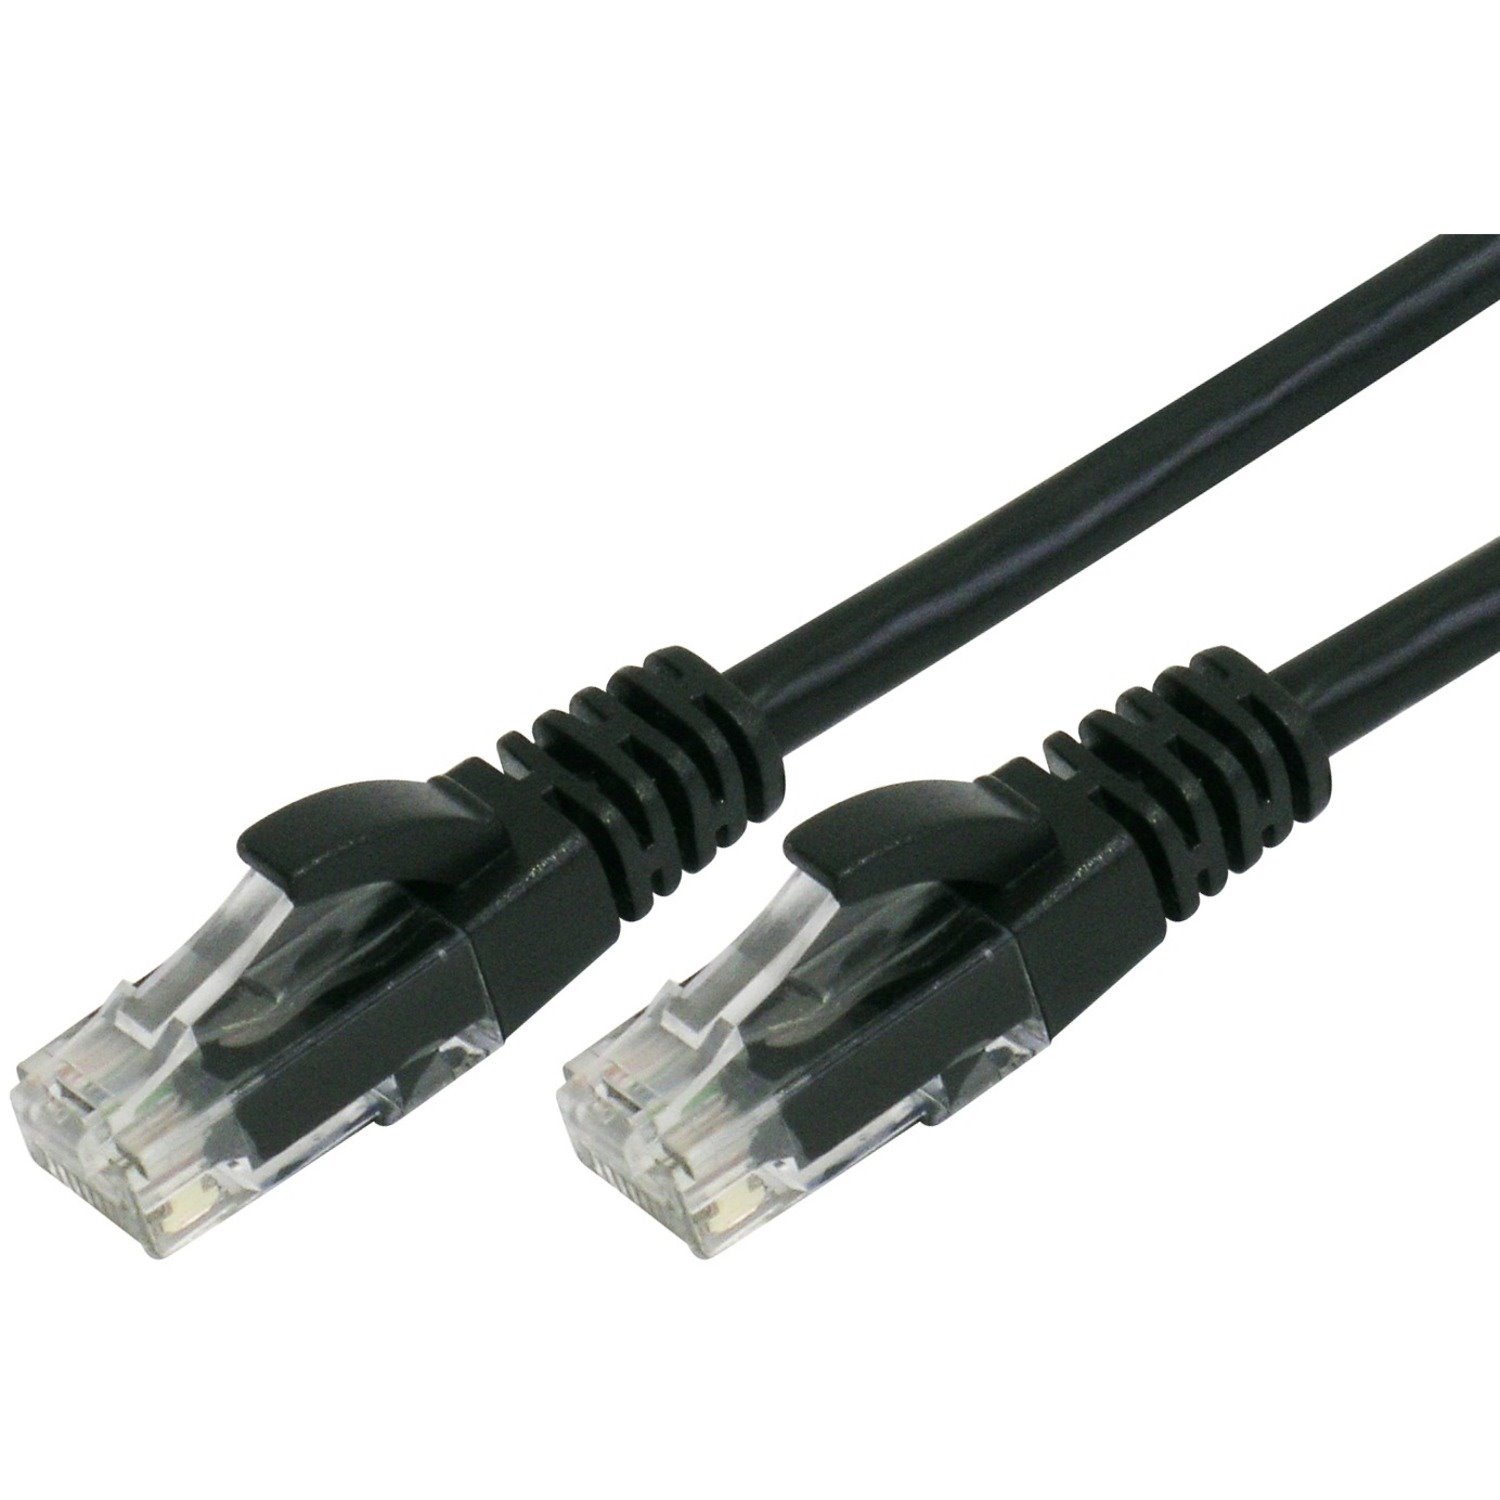 Comsol 2 m Category 6 Network Cable for Switch, Storage Device, Router, Modem, Host Bus Adapter, Patch Panel, Network Device